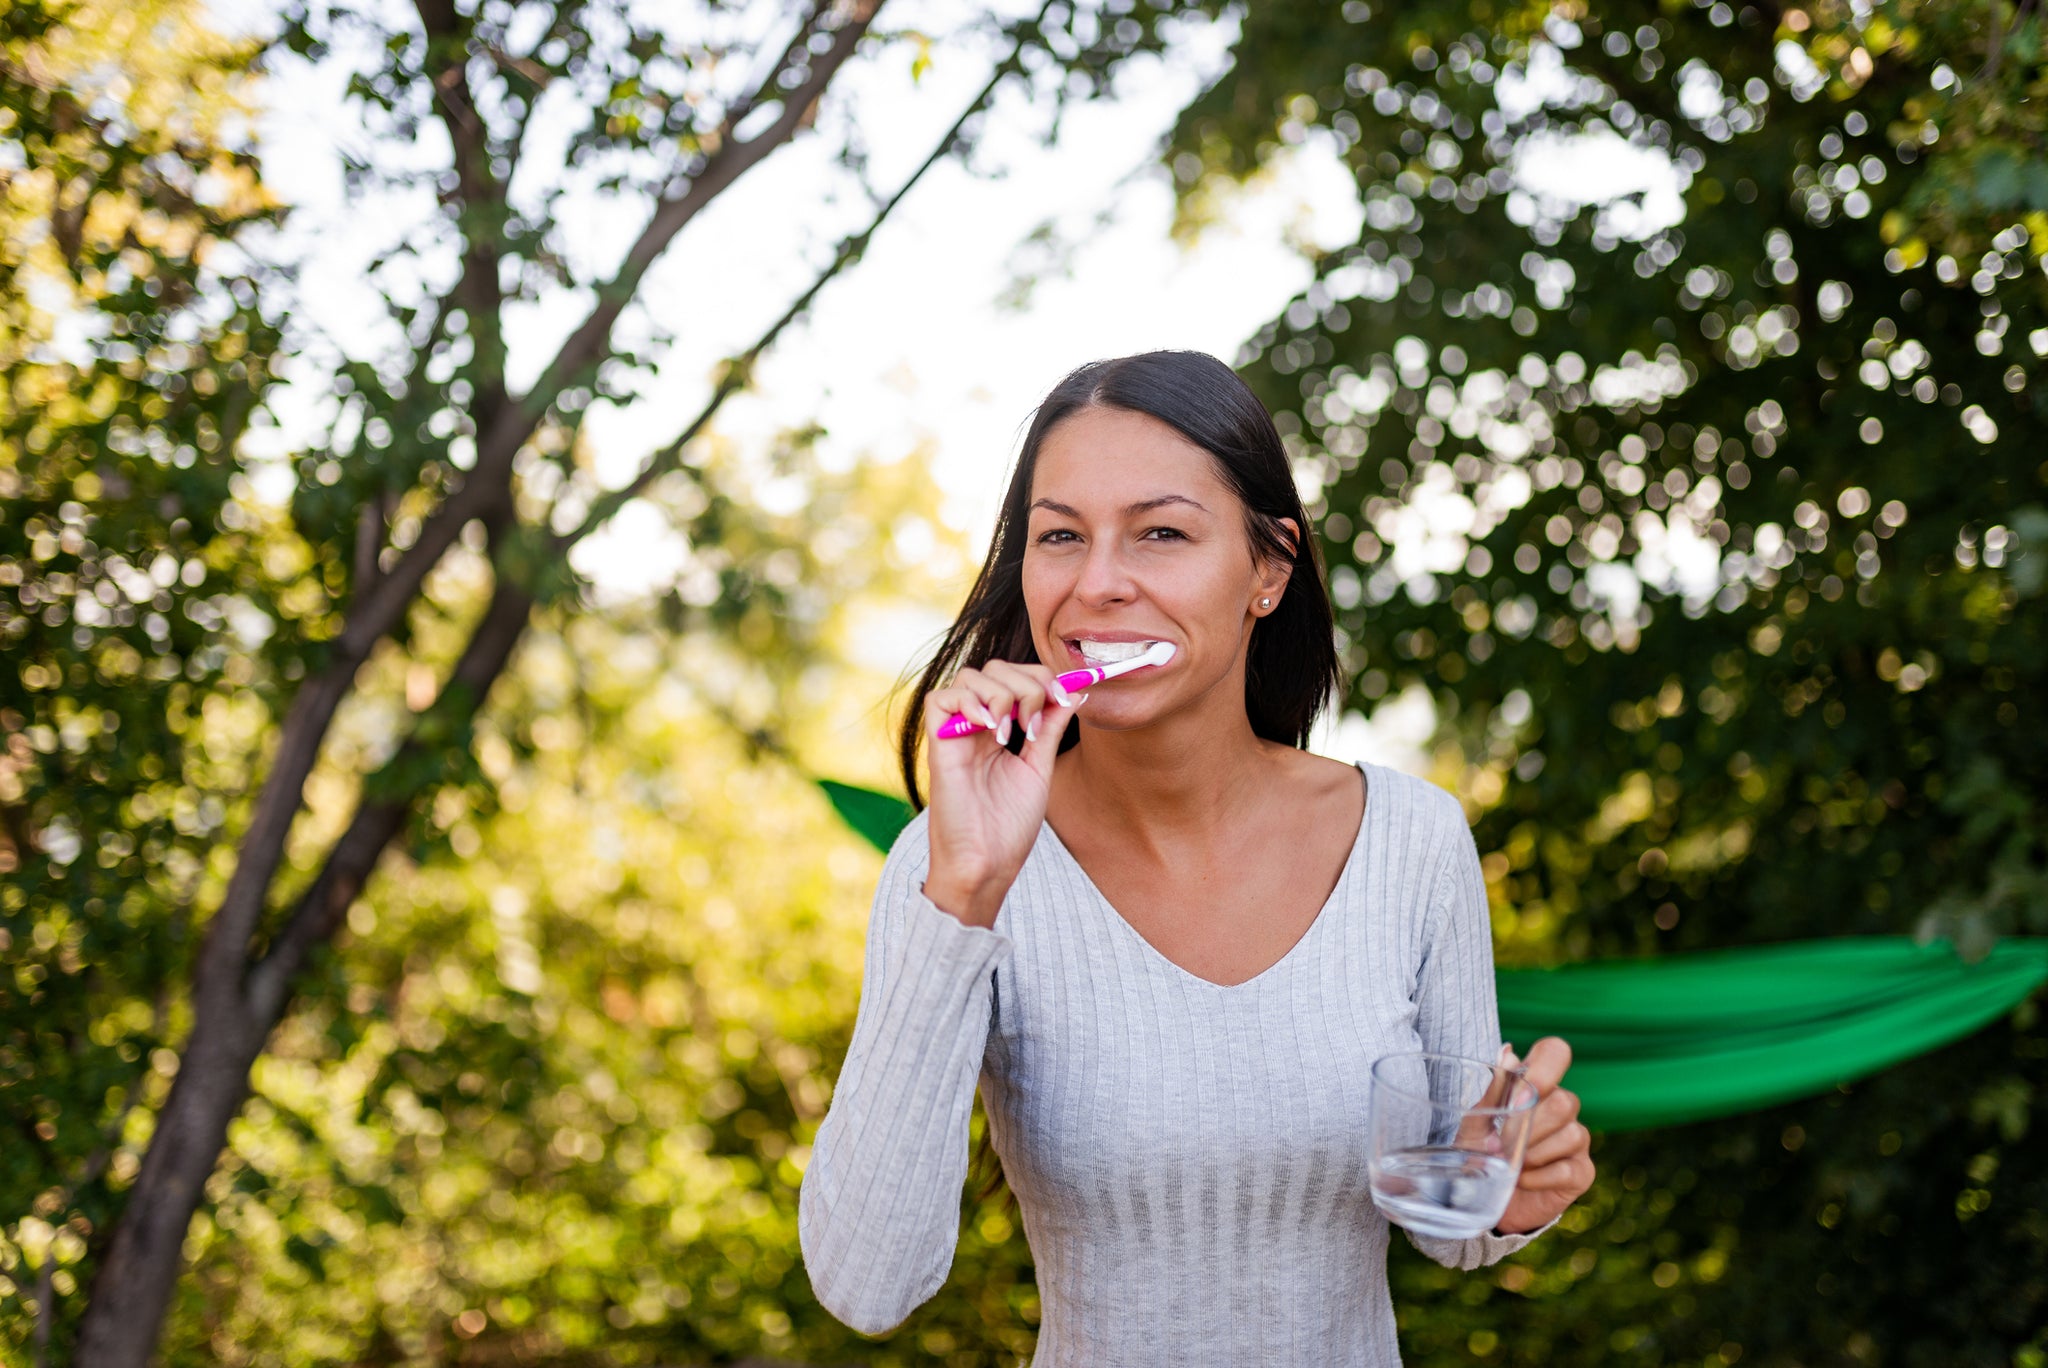 A Guide to Brushing Your Teeth When Camping